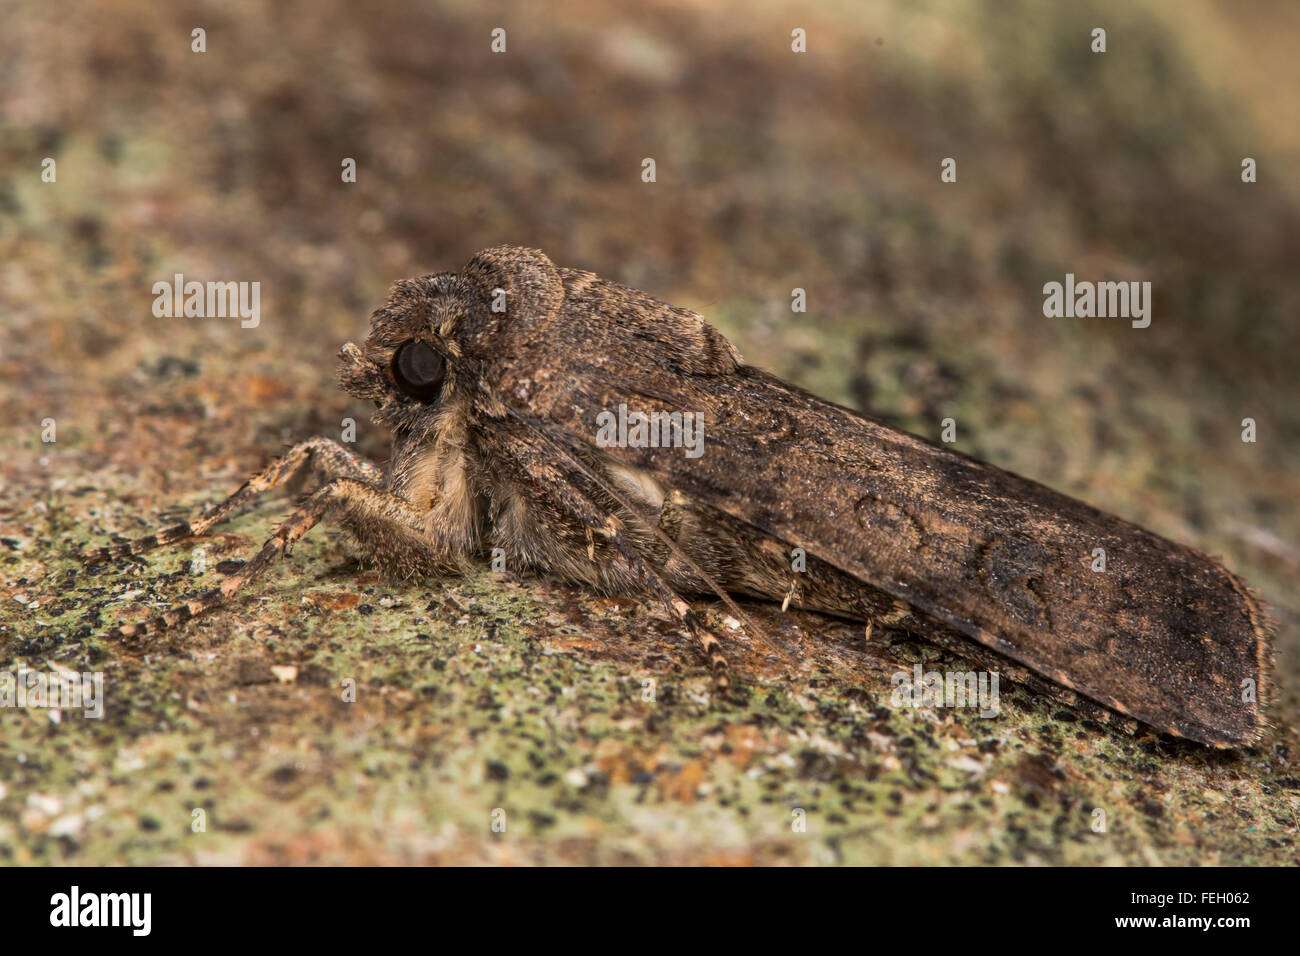 Turnip moth (Agrotis segetum). A moth in the family Noctuidae, seen in profile at rest. This insect is a pest of root vegetables Stock Photo